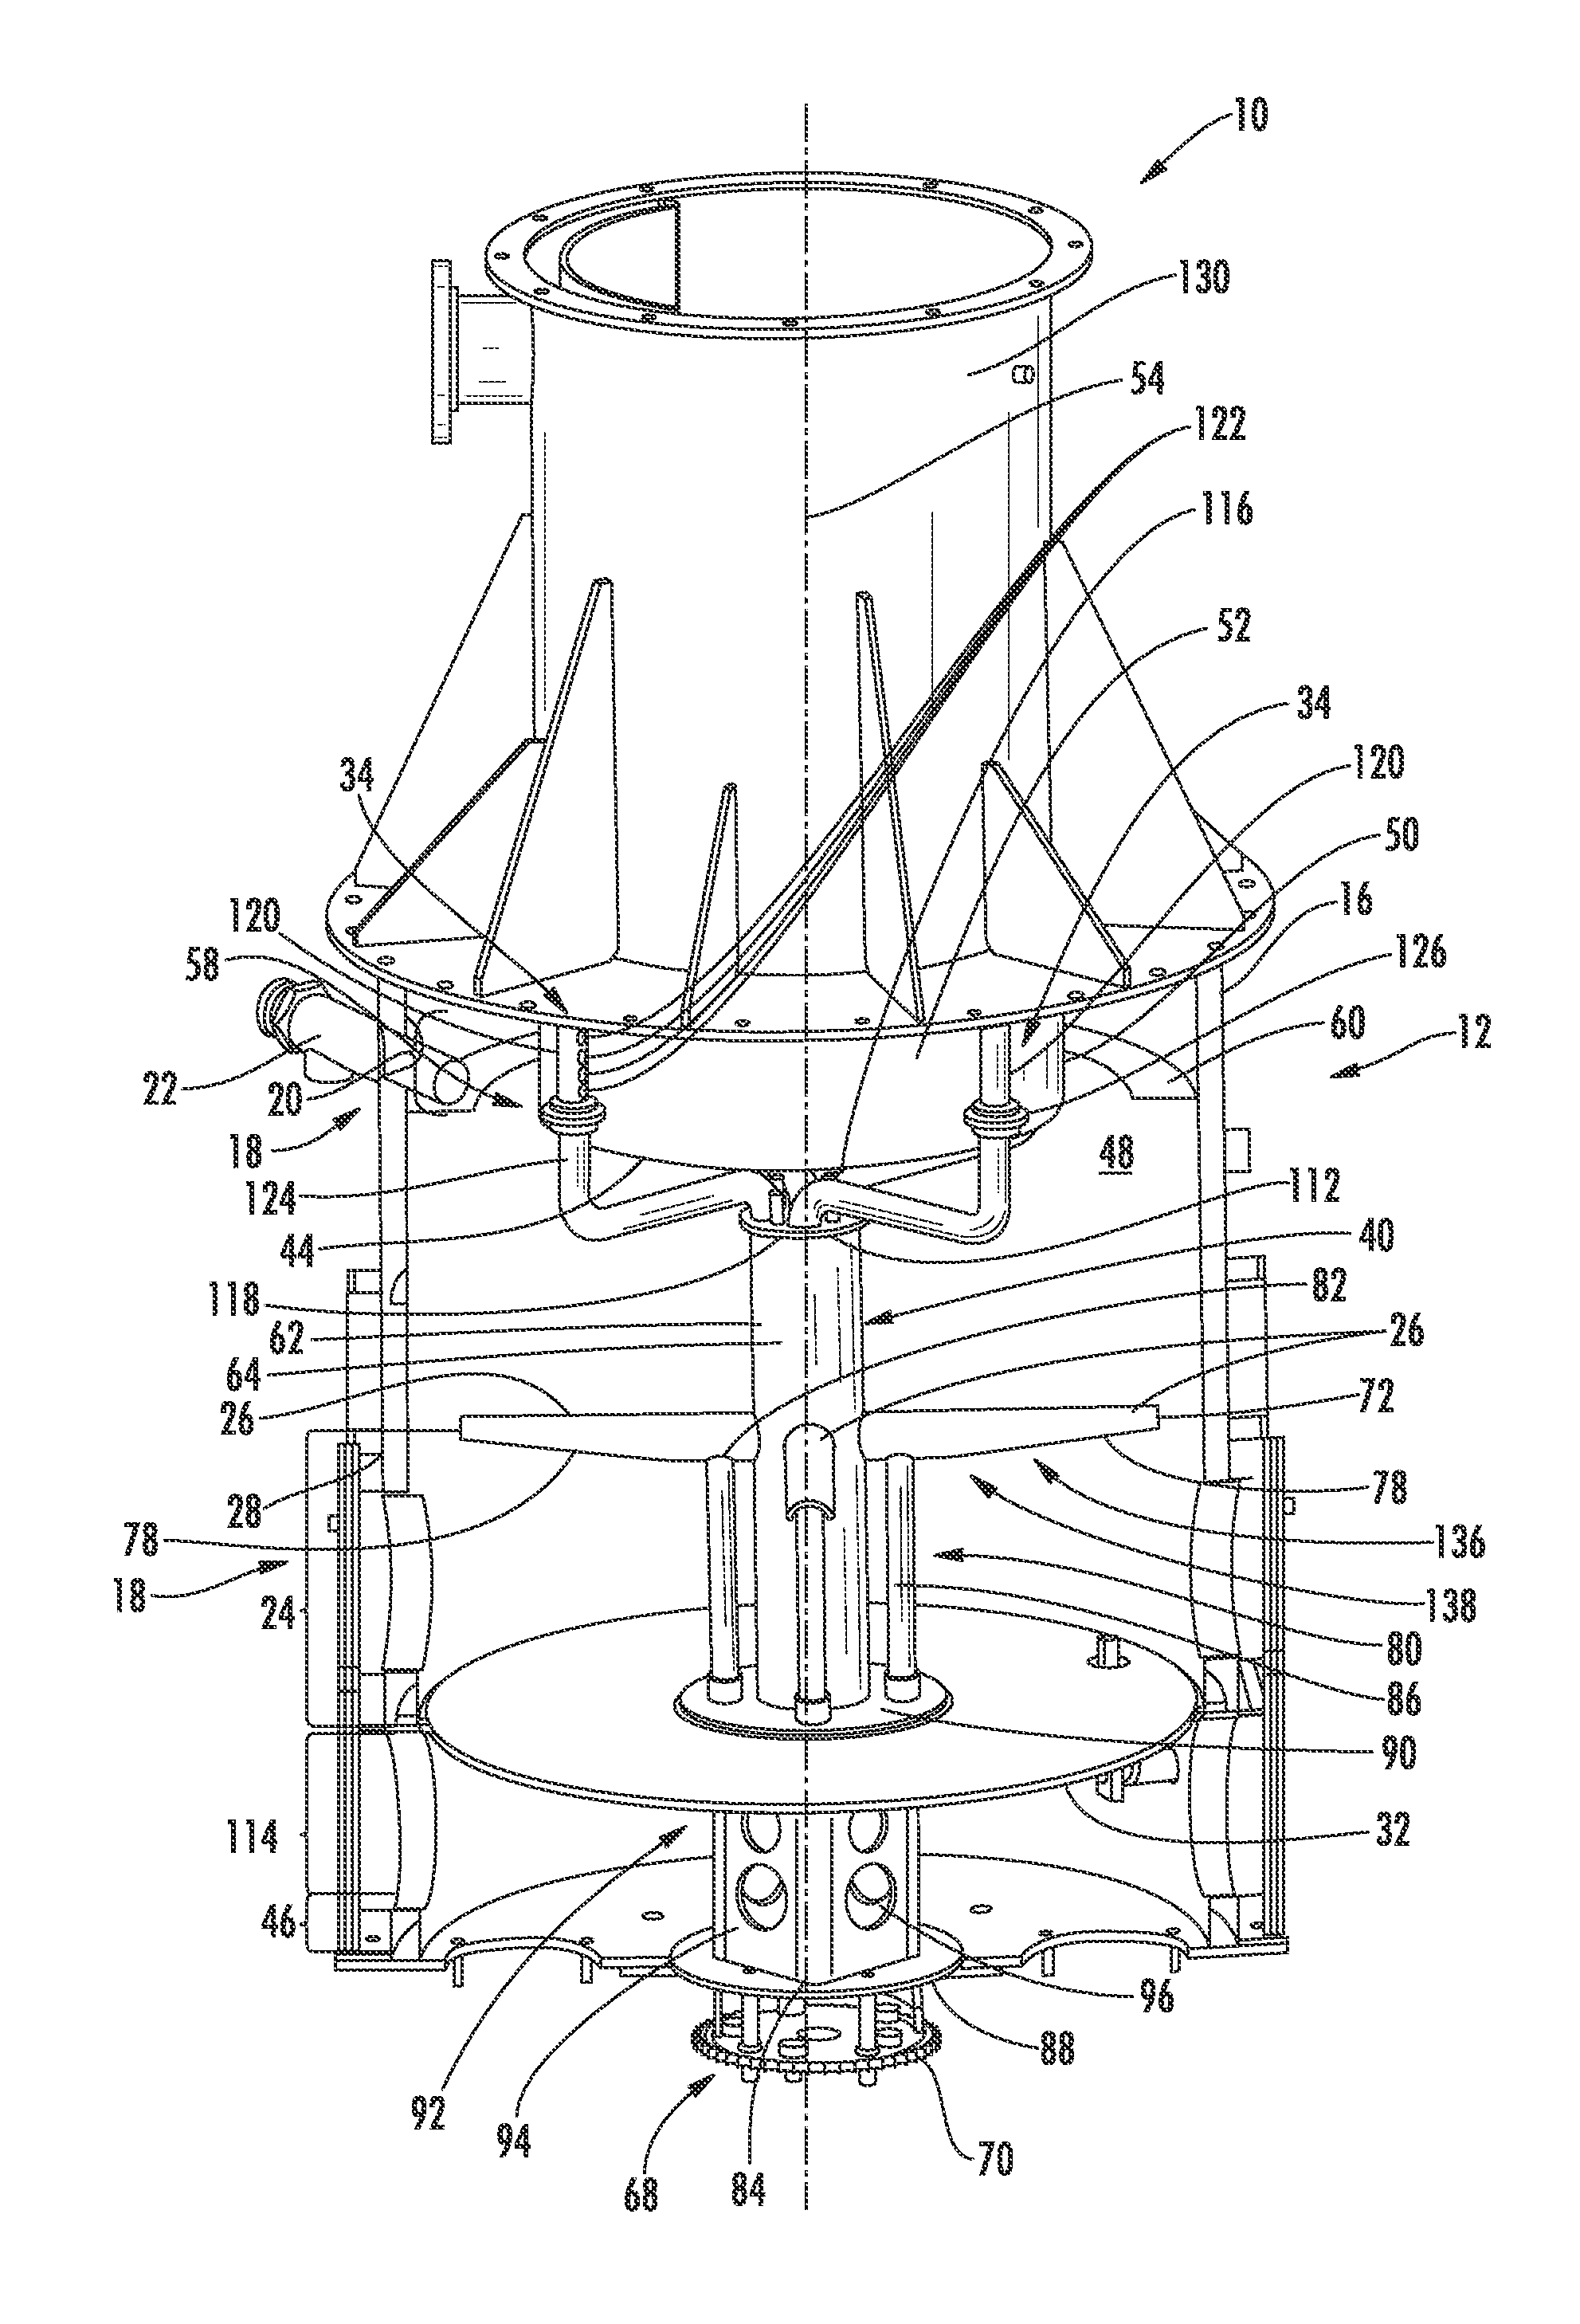 Plasma assisted gasification system with agitator drive assembly in reactor vessel